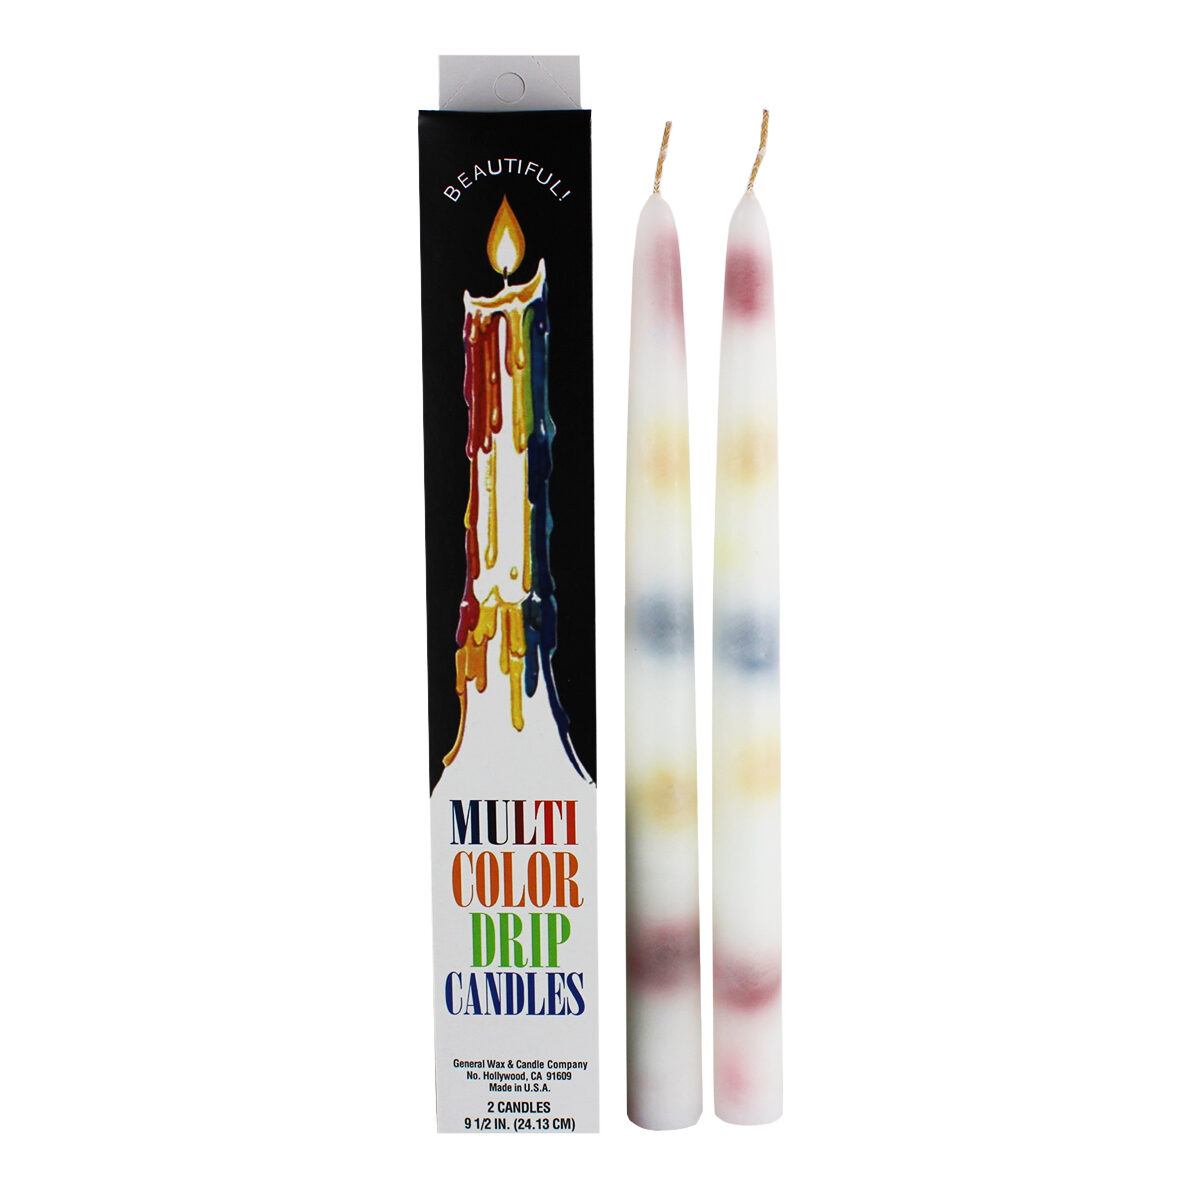 10 Multi-Color TAPER DRIP CANDLES 3/4" x 9 1/2" long 5 packs of 2 